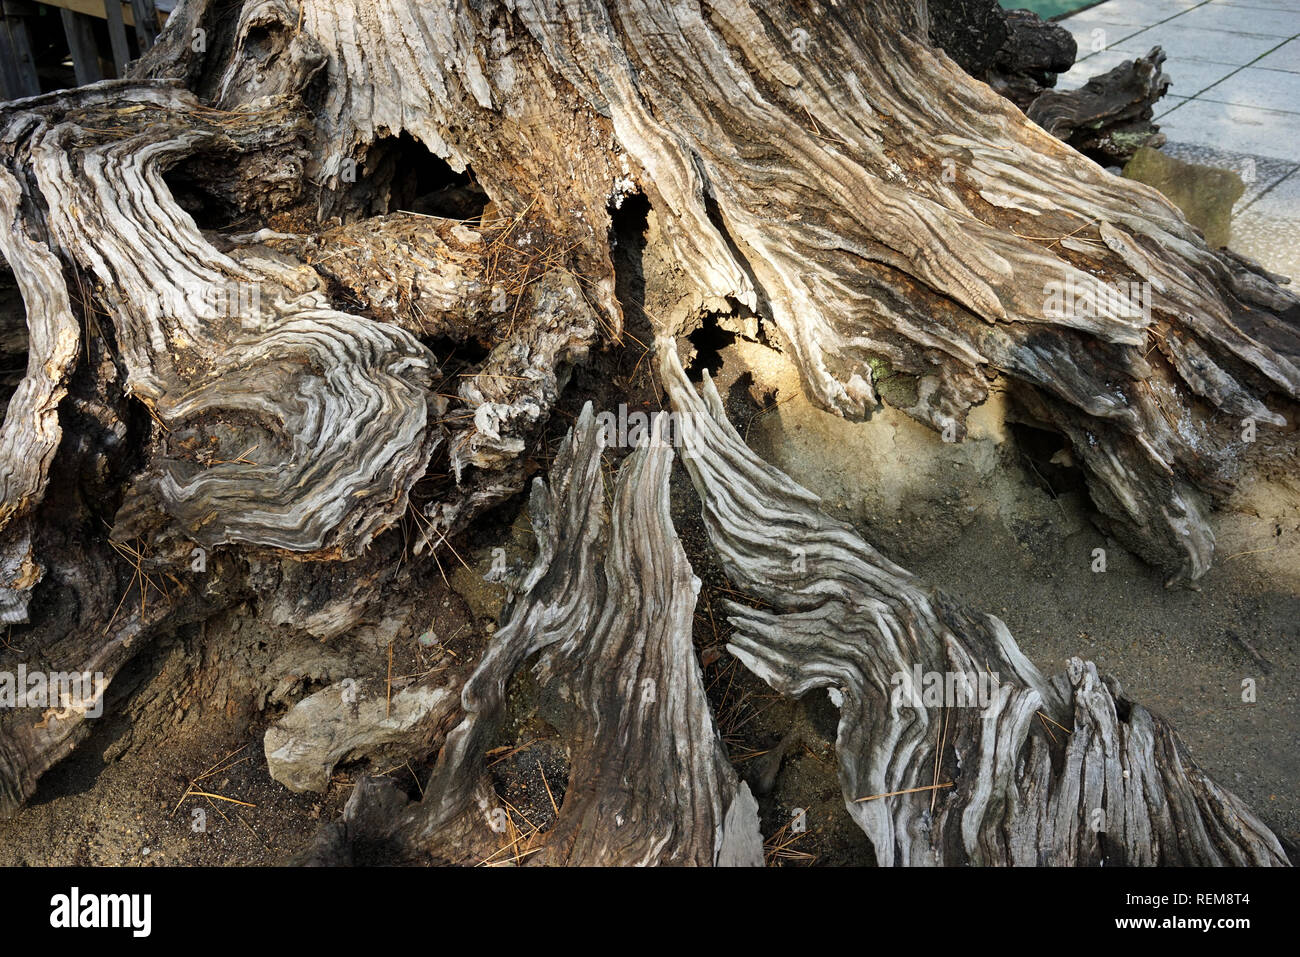 Knarled and decaying tree trunk in Japan Stock Photo